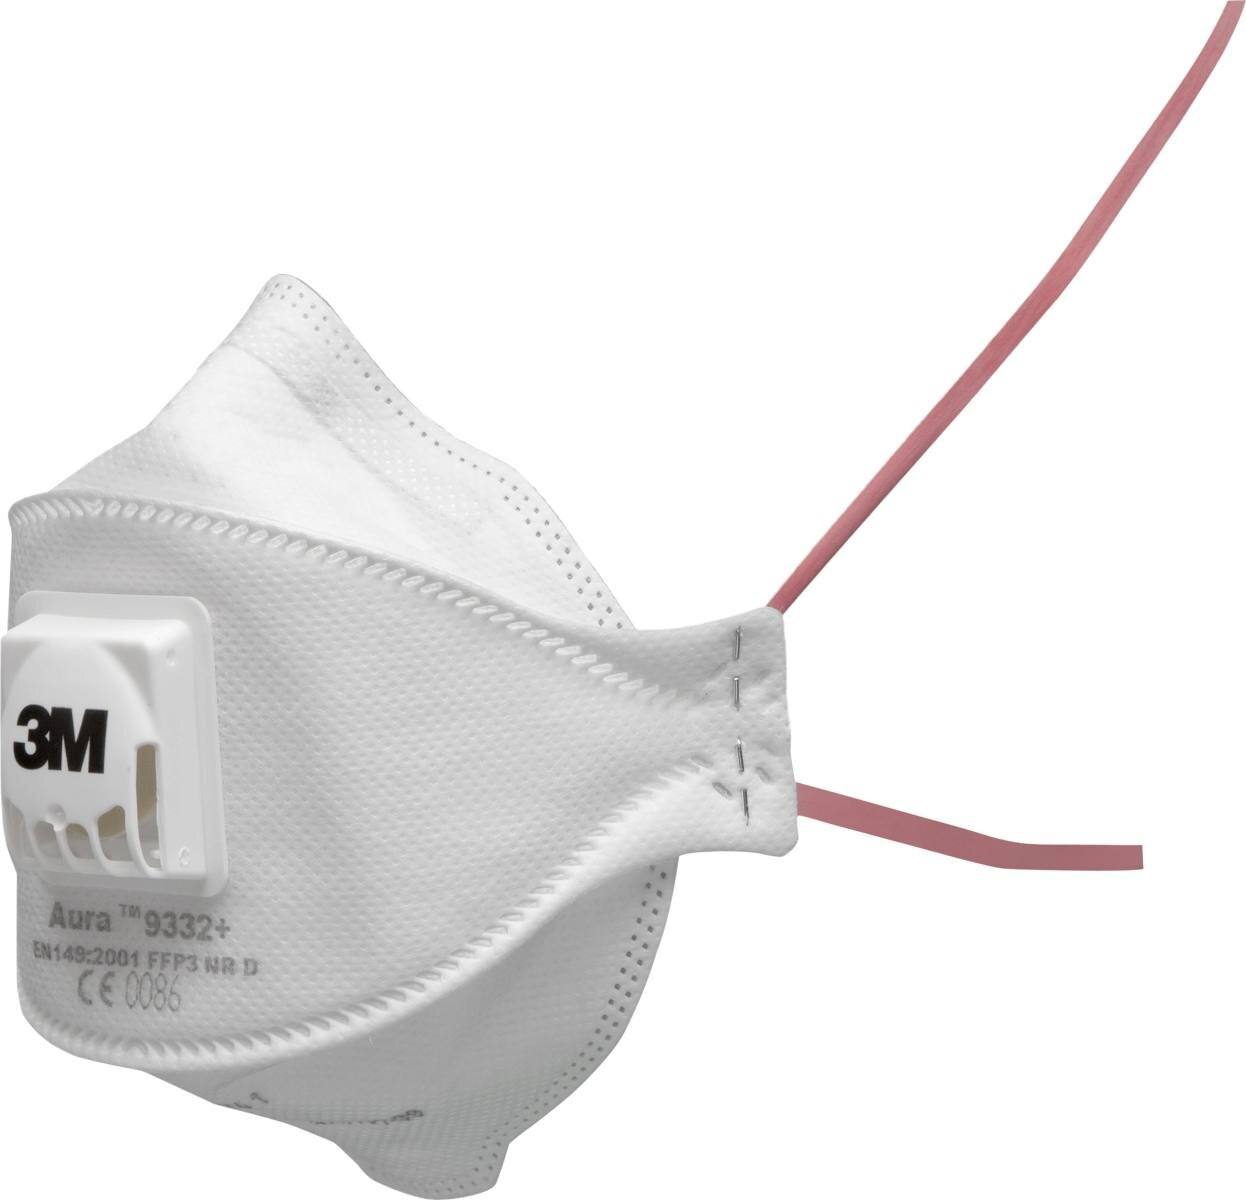 3M 9332+SV Aura Respirator FFP3 with cool-flow exhalation valve, up to 30 times the limit value (hygienically individually packaged), small pack